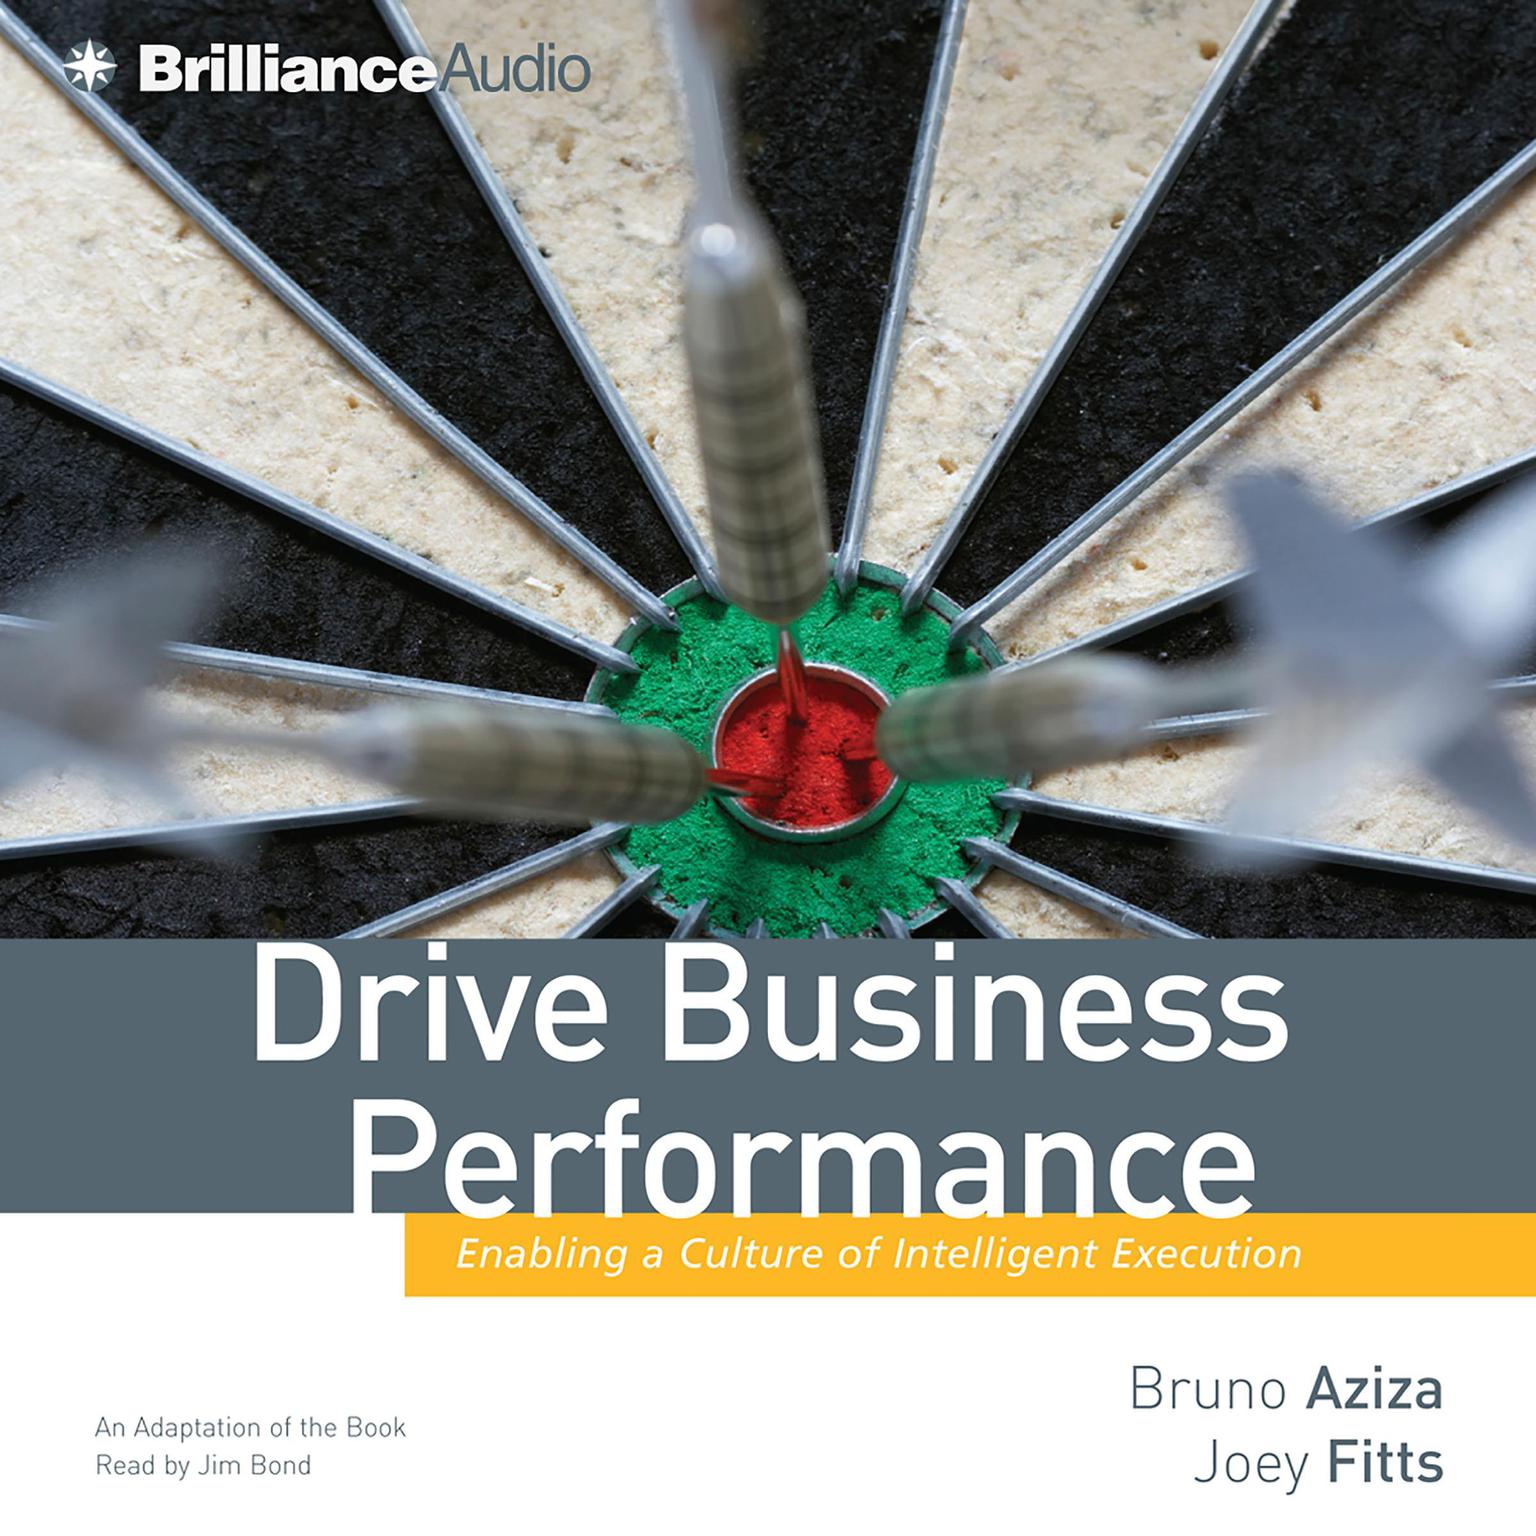 Drive Business Performance (Abridged): Enabling a Culture of Intelligent Execution Audiobook, by Bruno Aziza